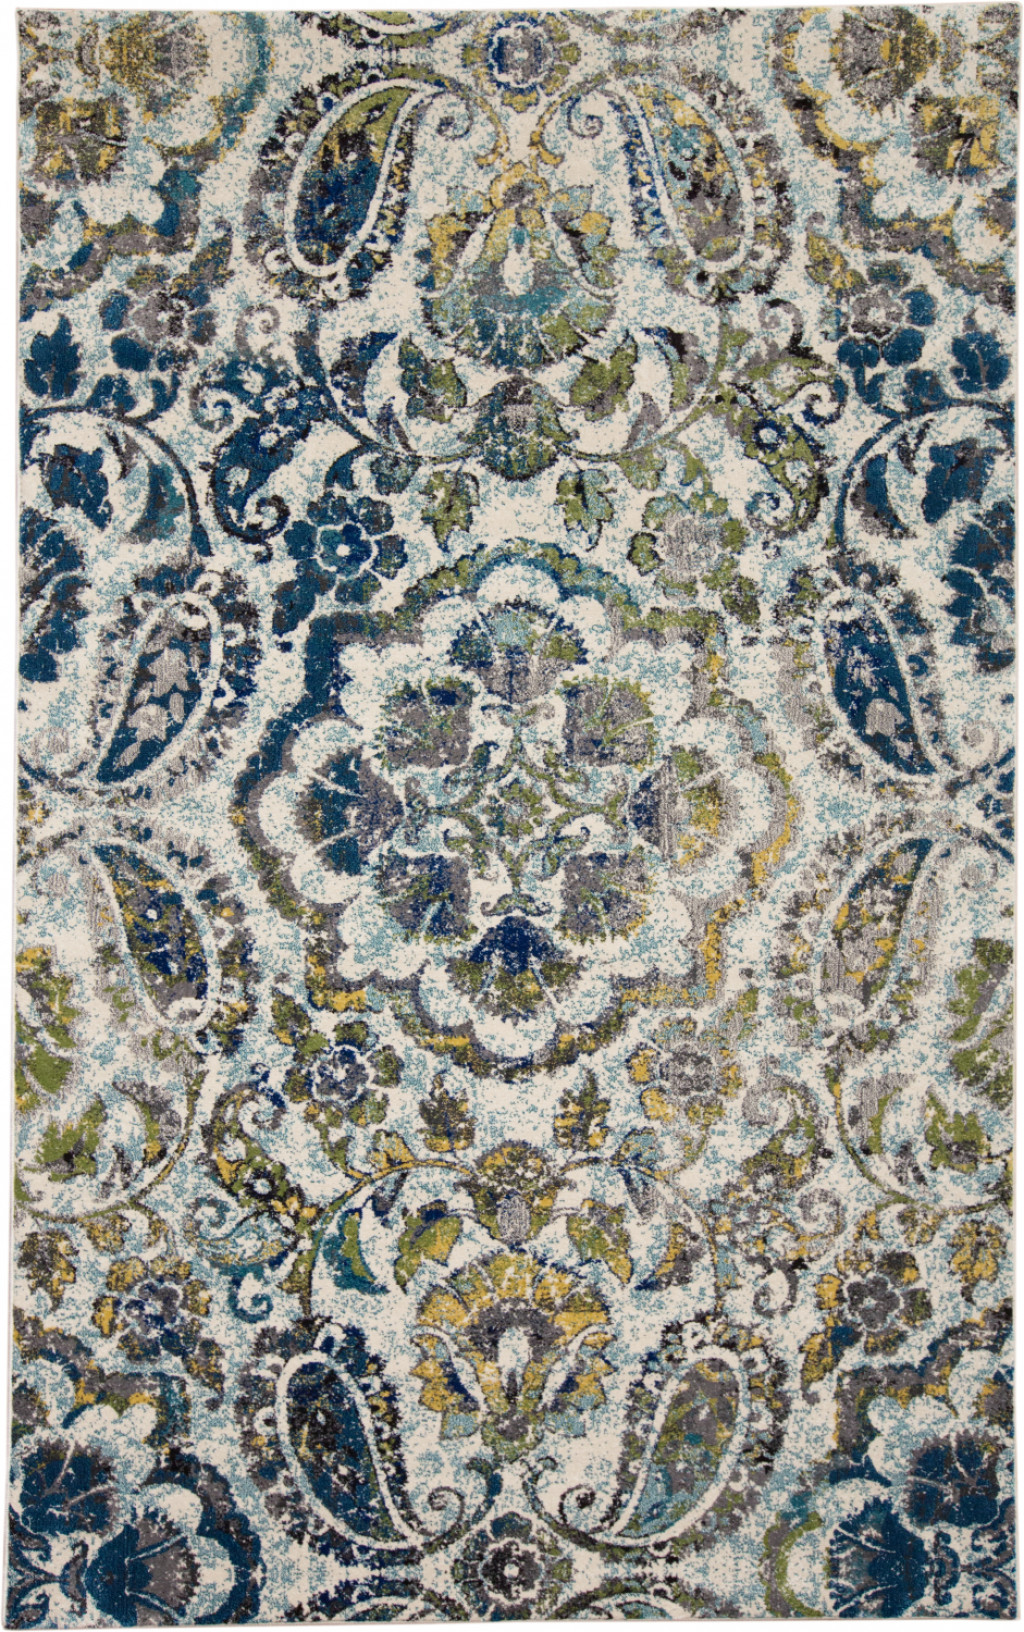 5' X 8' Ivory Blue And Green Floral Stain Resistant Area Rug-511143-1